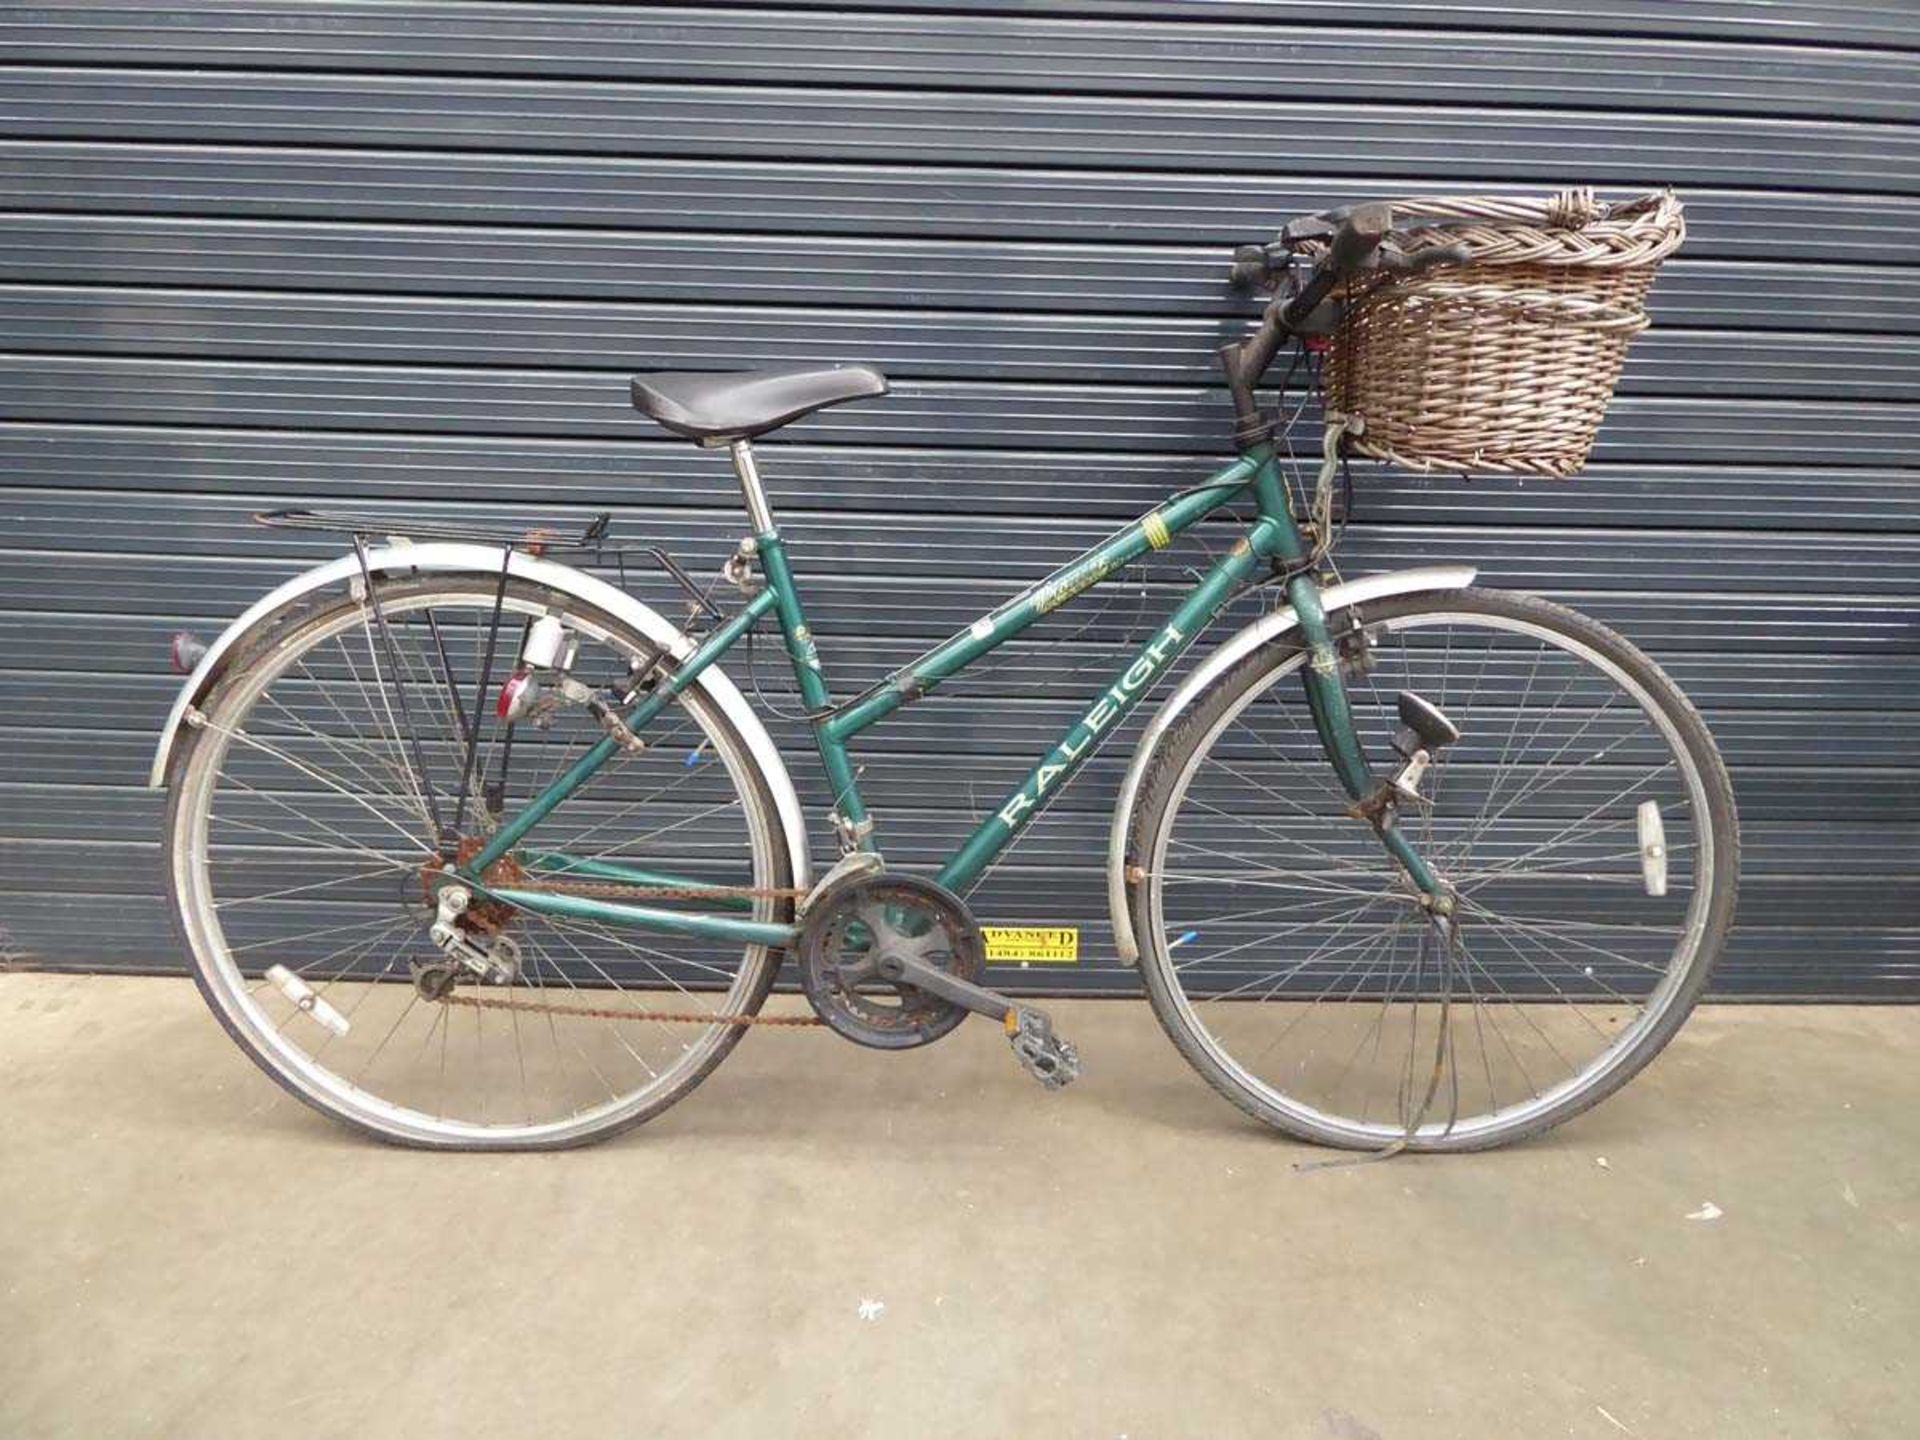 Raleigh green lady's bike with front basket